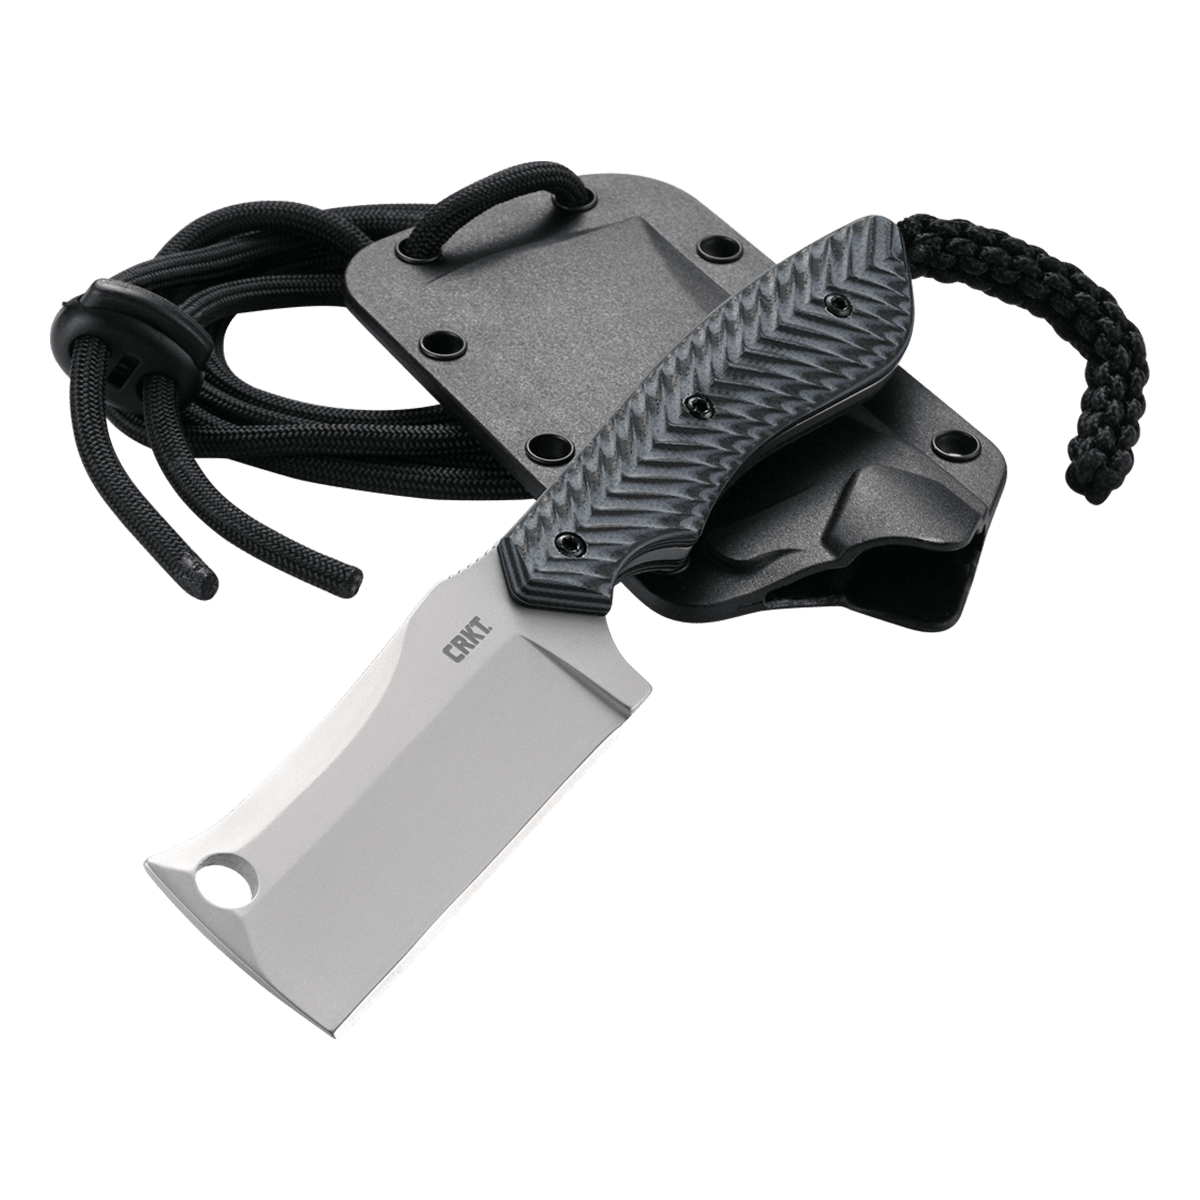 CRKT S.P.E.C. (SMALL. POCKET. EVERYDAY. CLEAVER.)